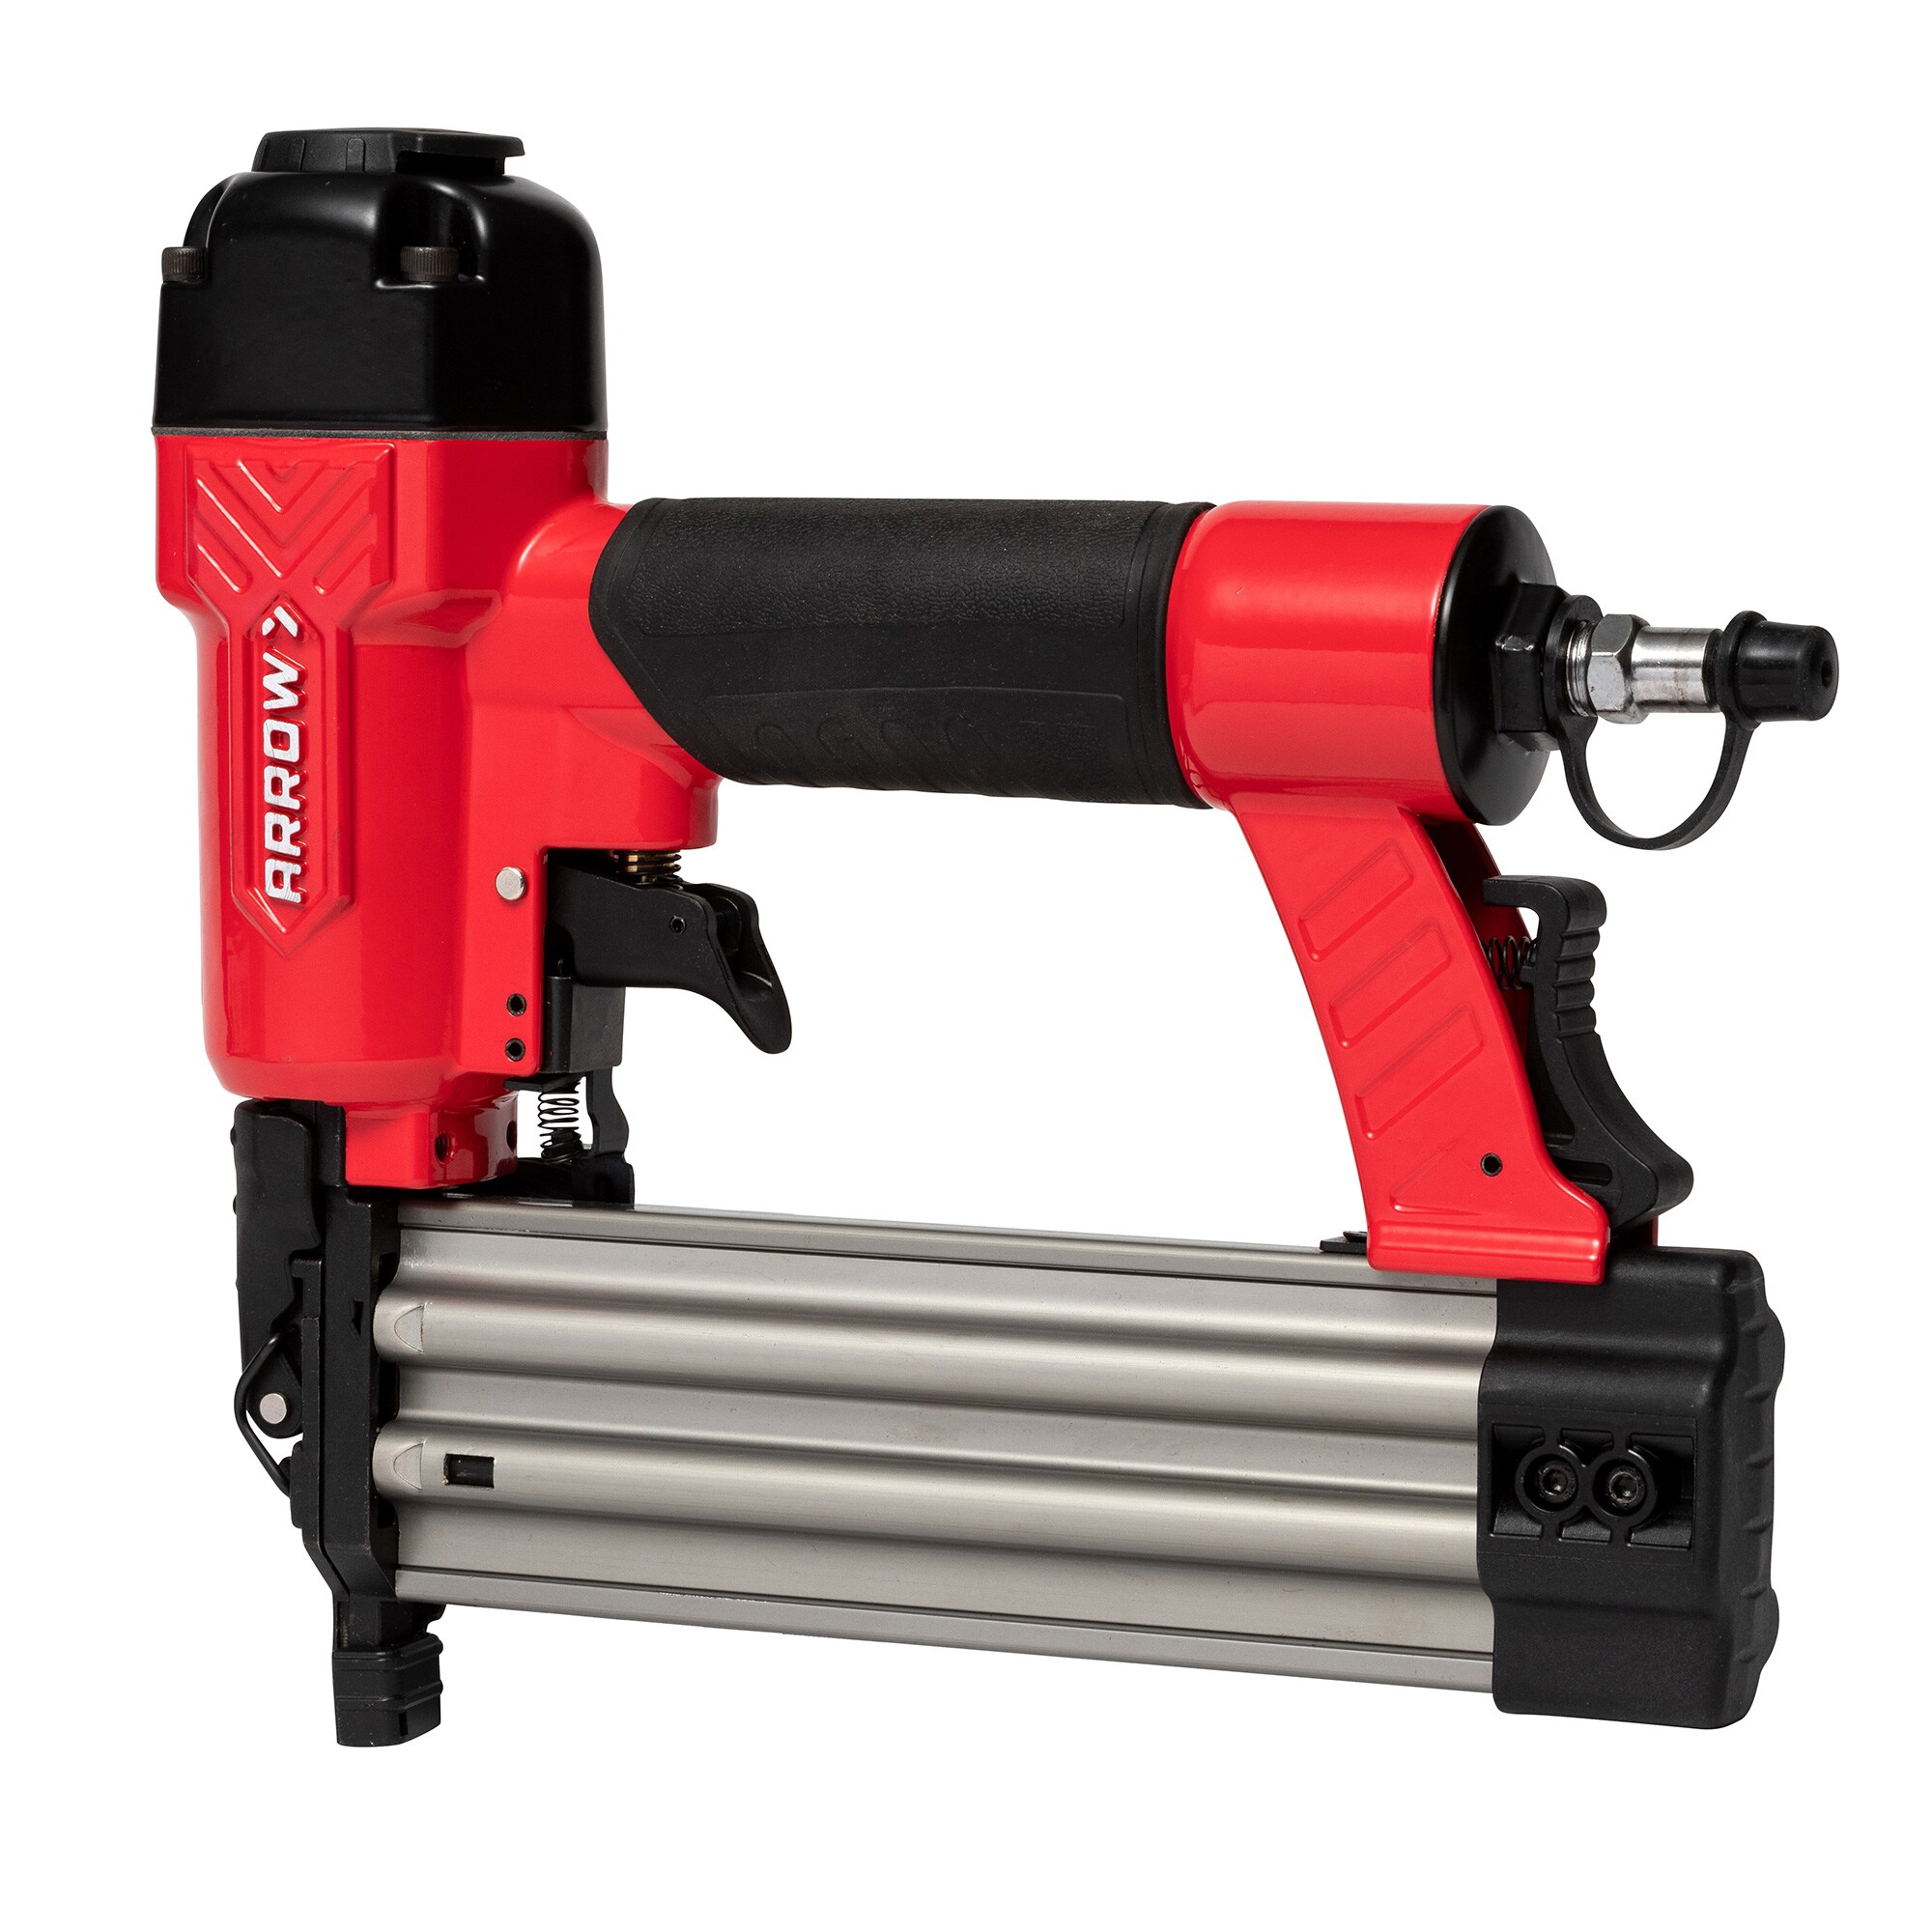 We Tried The Cheapest Nail Gun At Lowe's. Here's How It Went